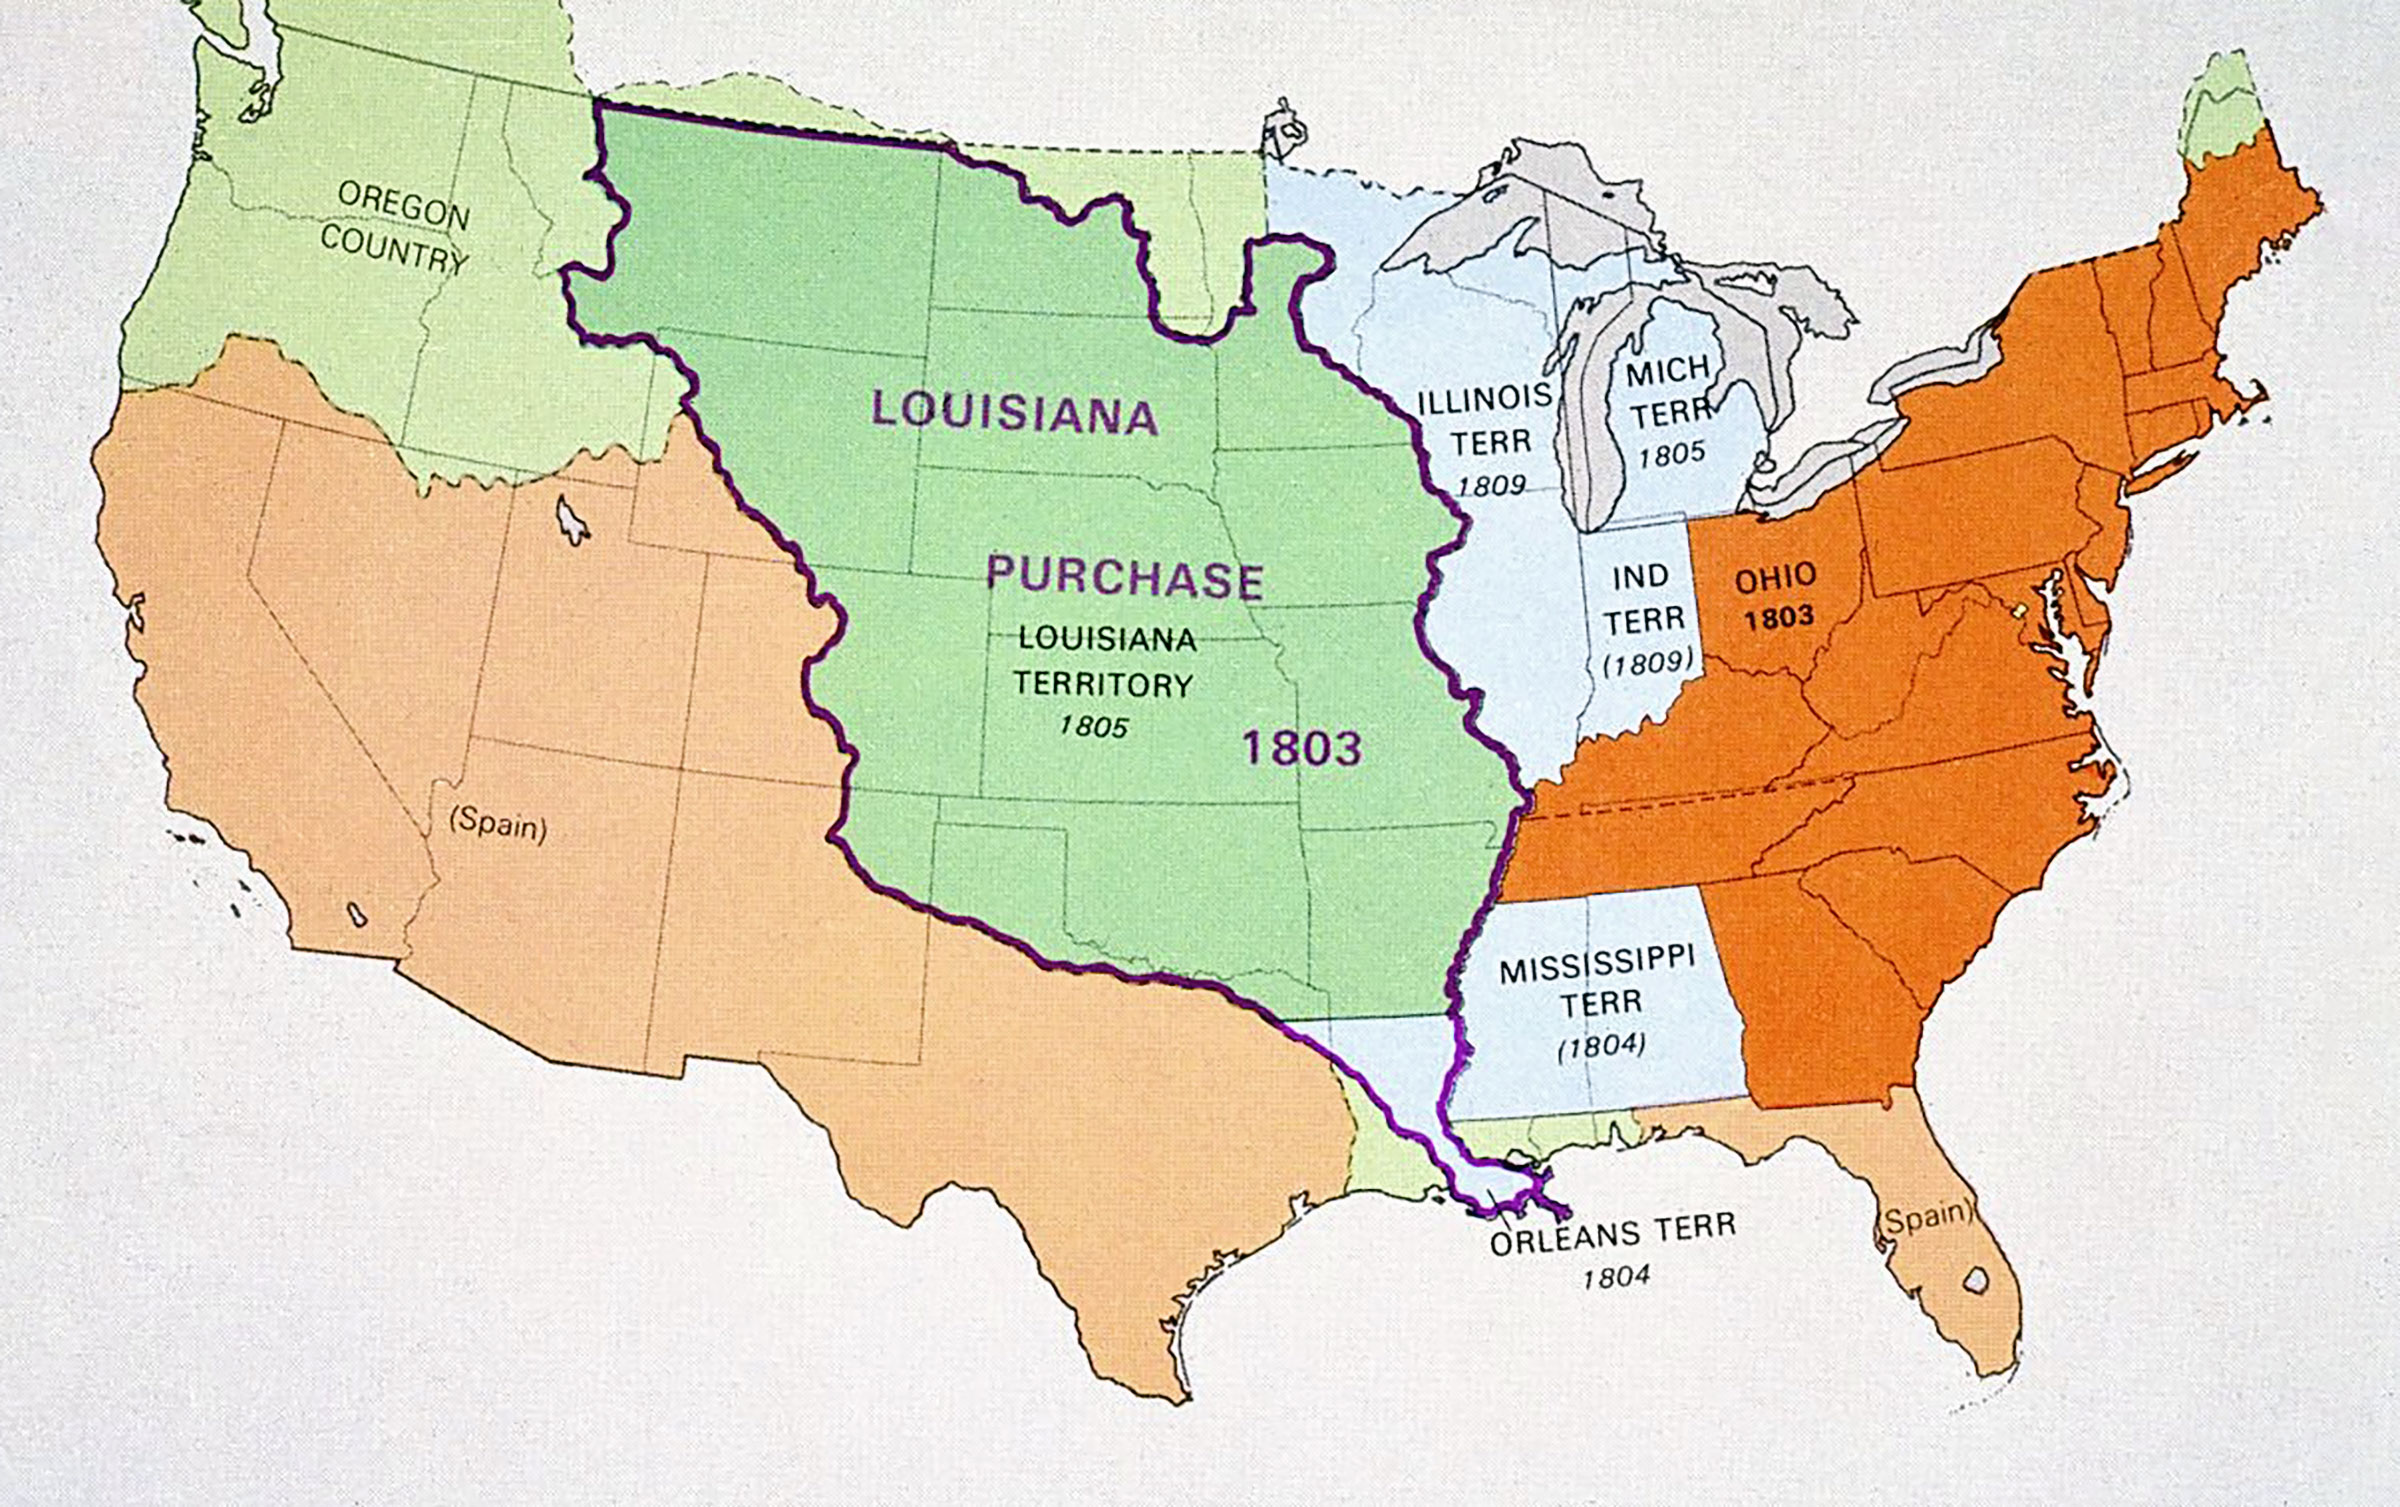 Expansion of the United States with the Louisiana Purchase.